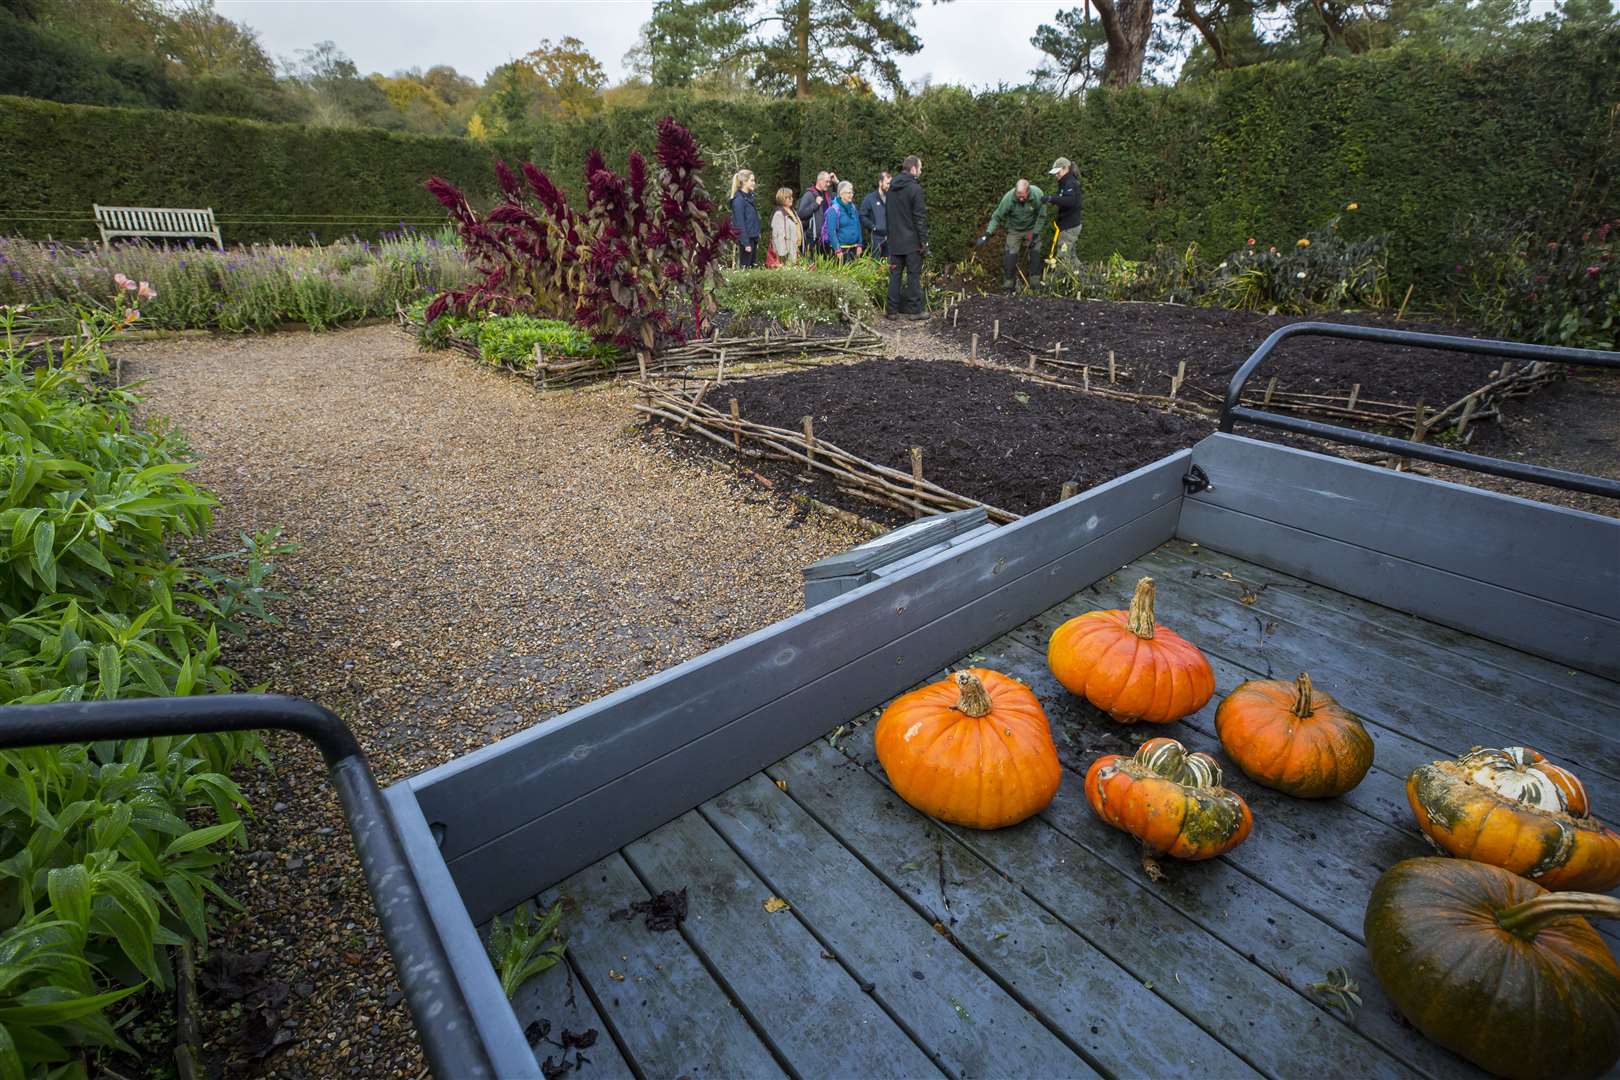 Take your picture with a pumpkin at Ightham Mote. Picture: ©National Trust Images / Chris Lacey